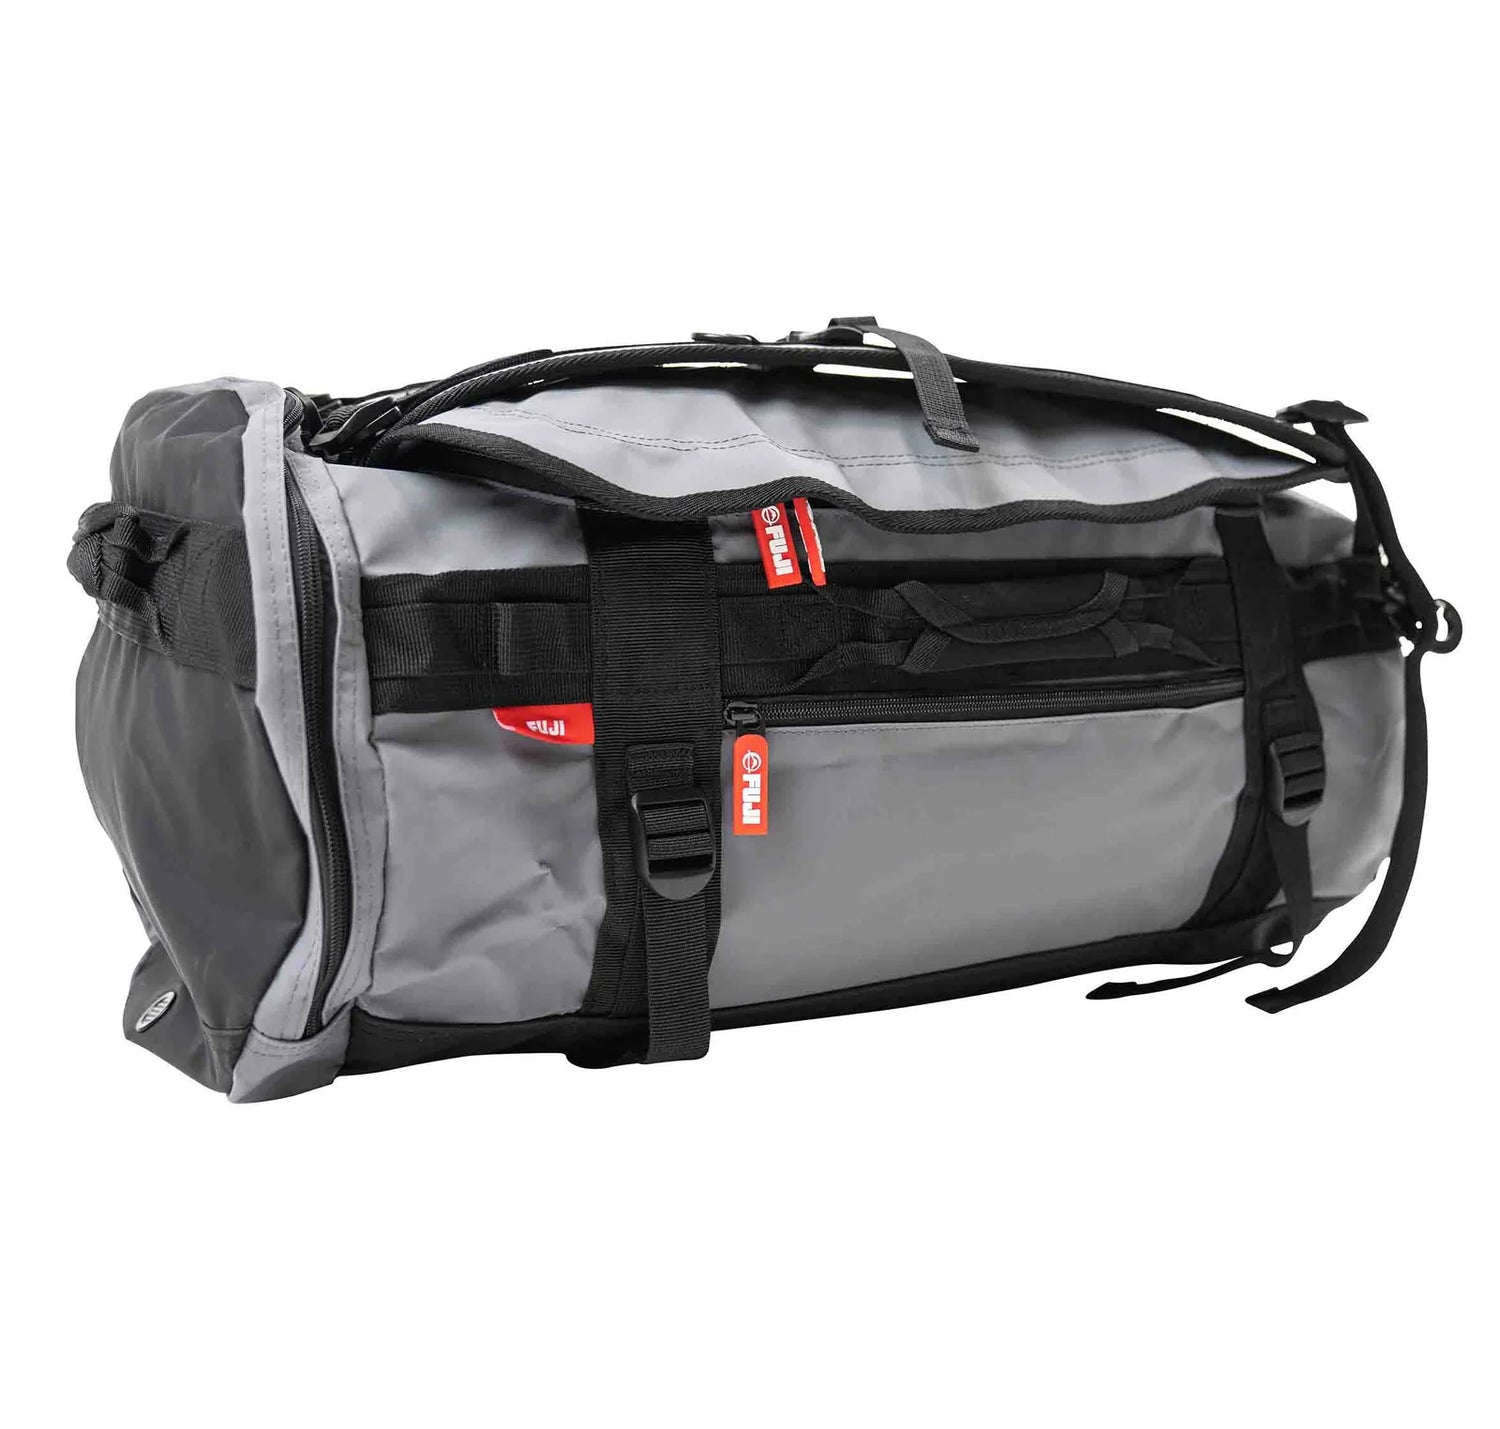 Comp Convertible Backpack Duffle by Fuji (5 Color Choices)